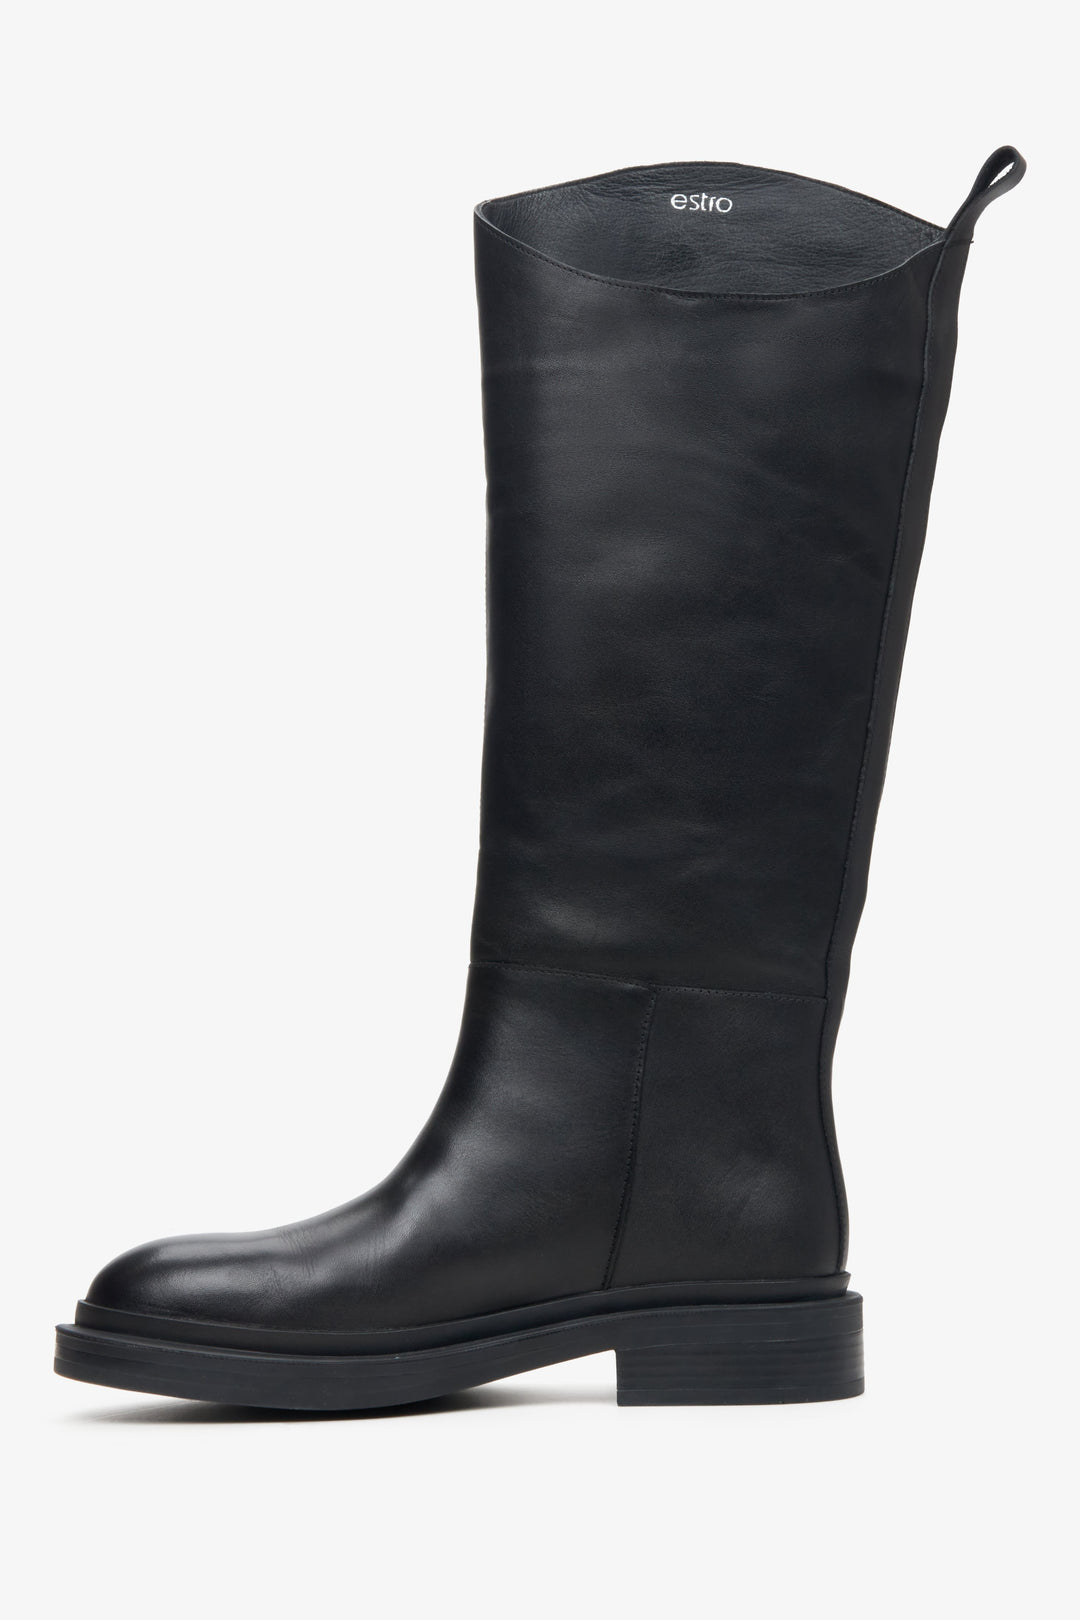 Women's black leather knee-high boots - shoe profile.